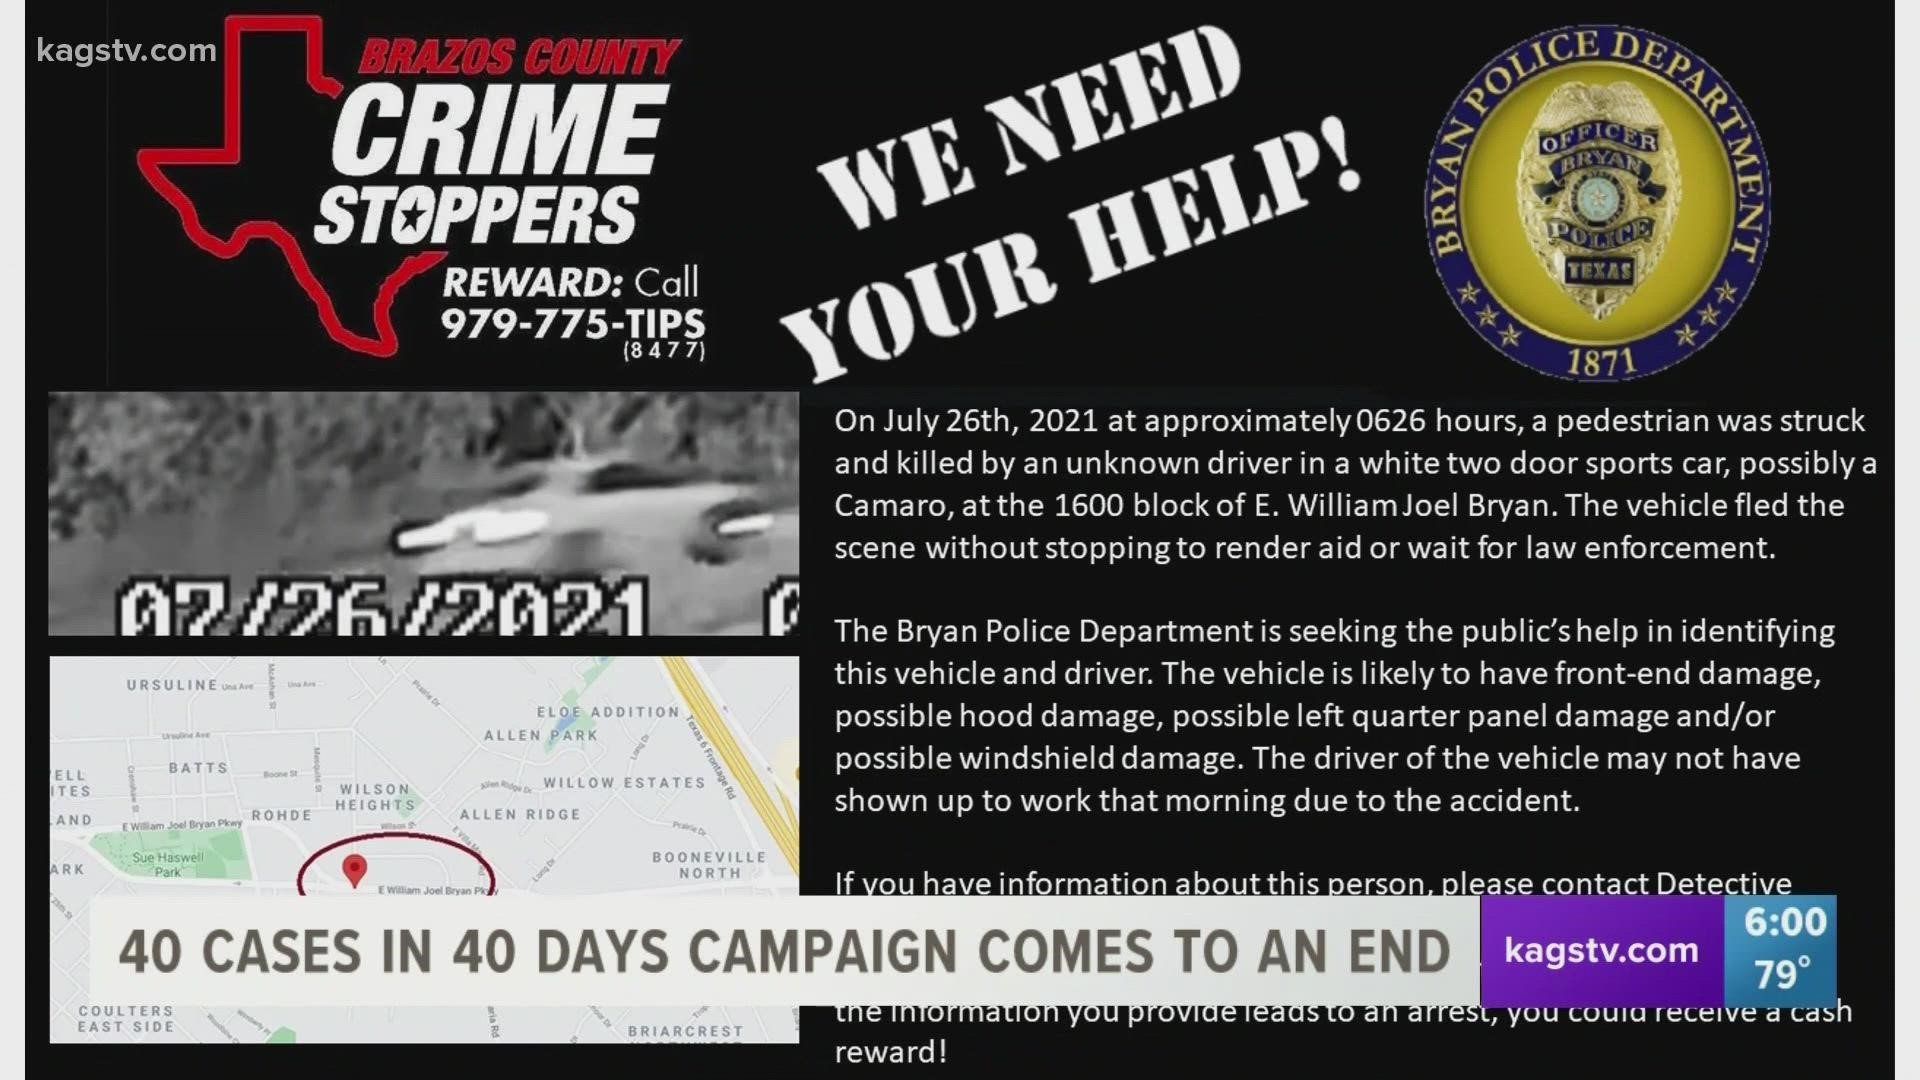 The Brazos County Crime Stoppers used social media and other news outlets to highlight 40 active crime cases in Brazos County